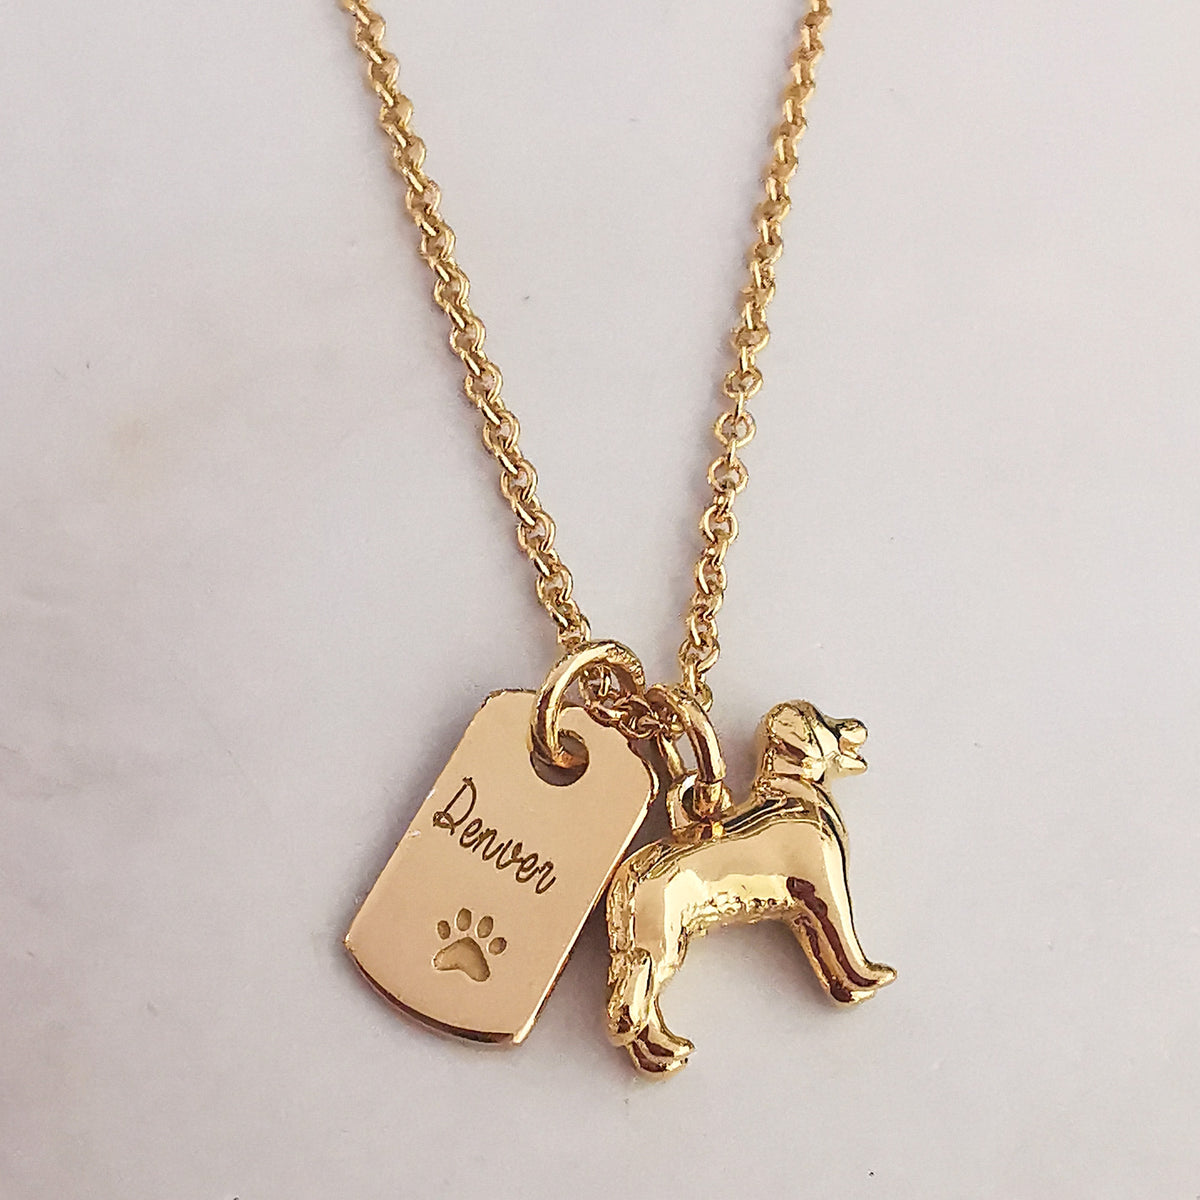 golden retriever personalized engraved necklace gift for pet loss made in UK Scarlett Jewellery